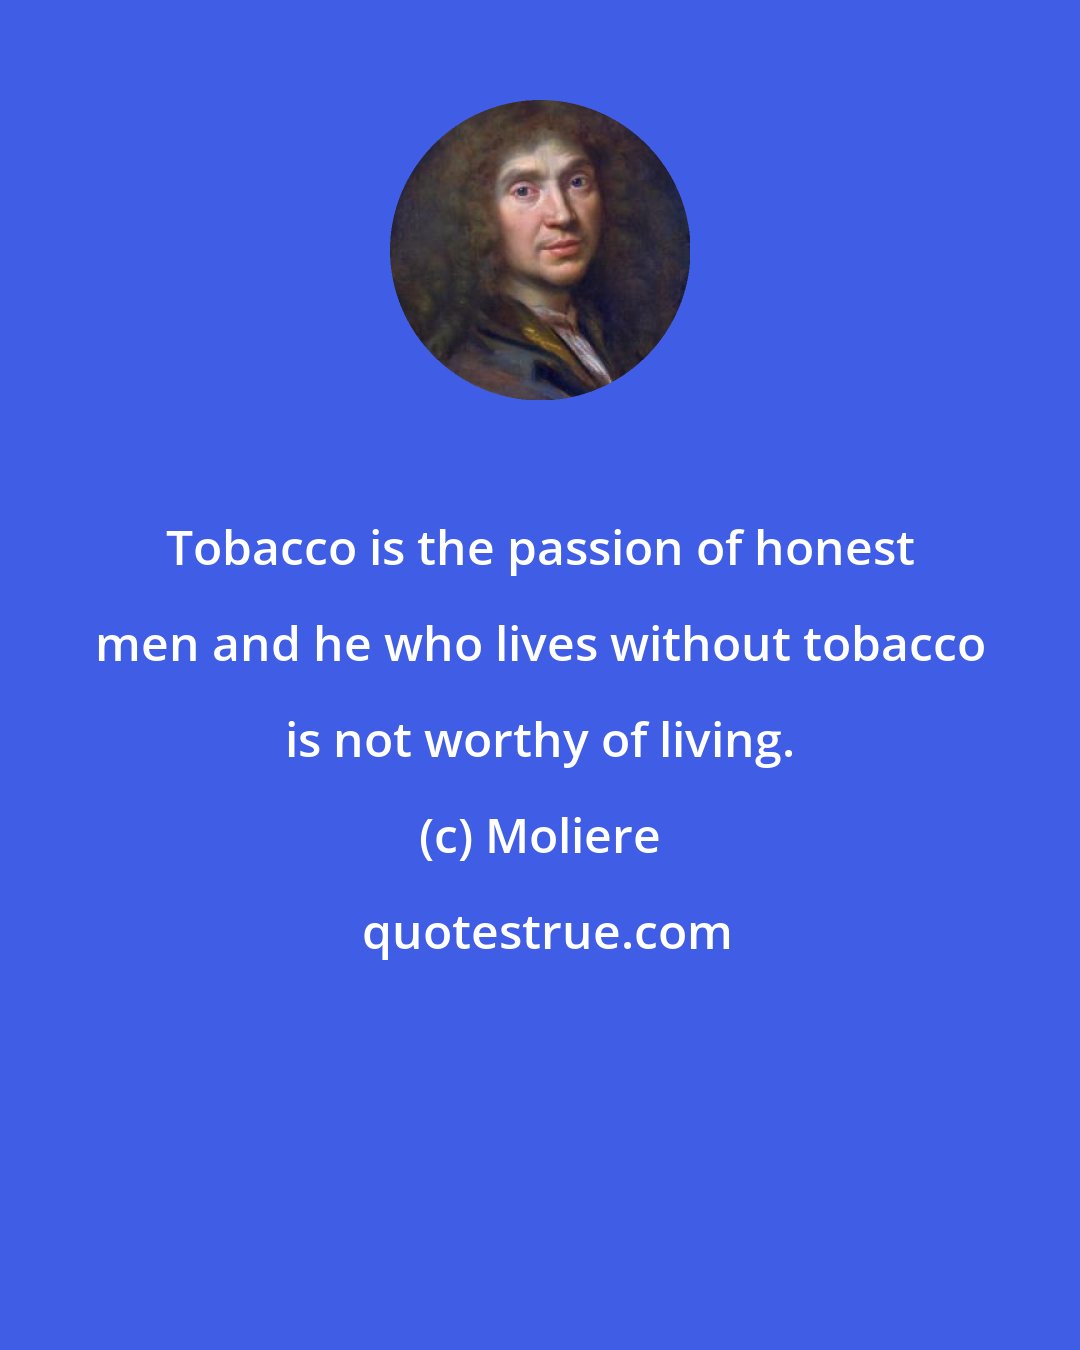 Moliere: Tobacco is the passion of honest men and he who lives without tobacco is not worthy of living.